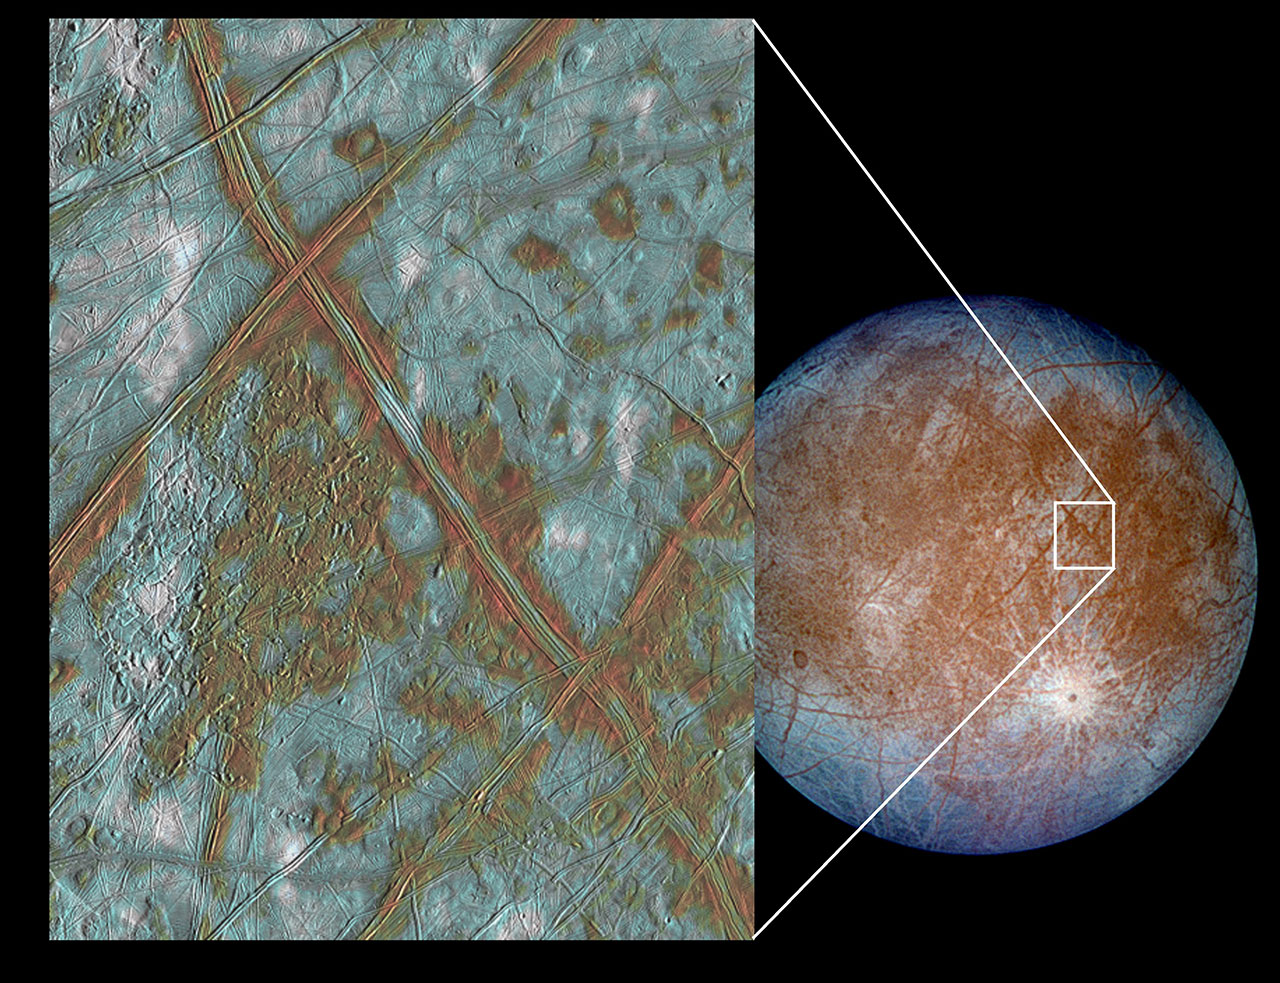 Close up image of Europa's surface